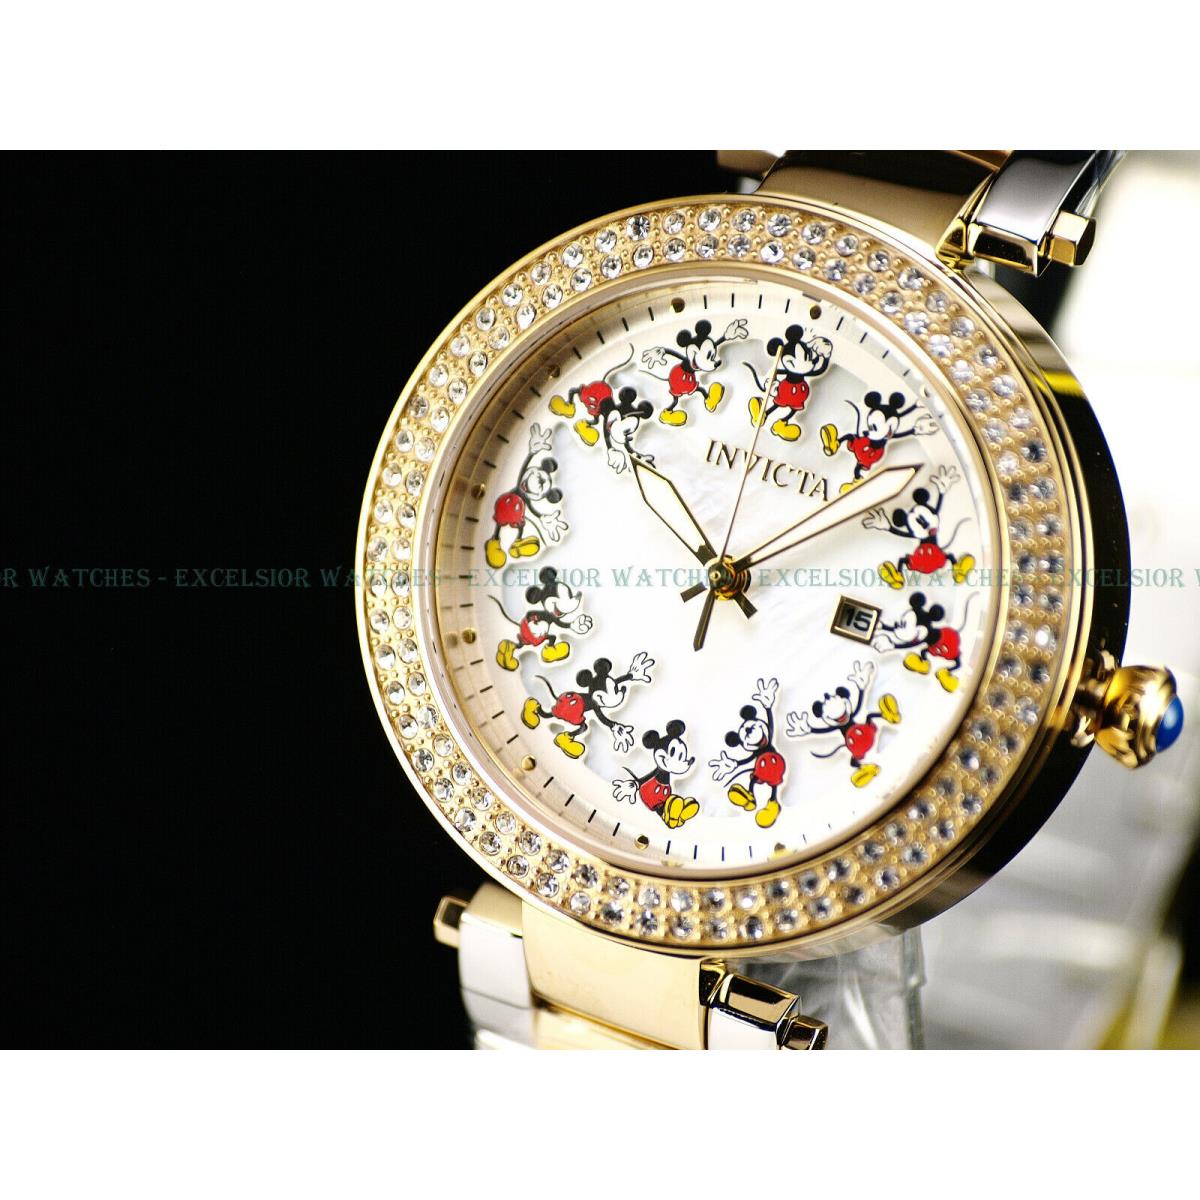 Invicta watch Disney Womens - White MOP Dial, Gold Band, Gold Bezel